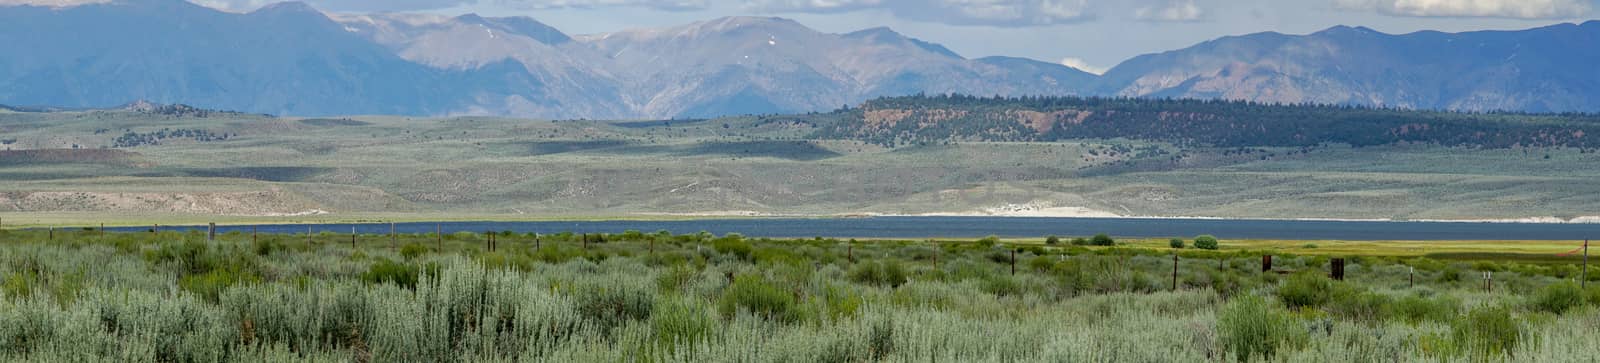 Green wild land with sagebrush plant and mountain in the background next the Lake Crowley by Bonandbon